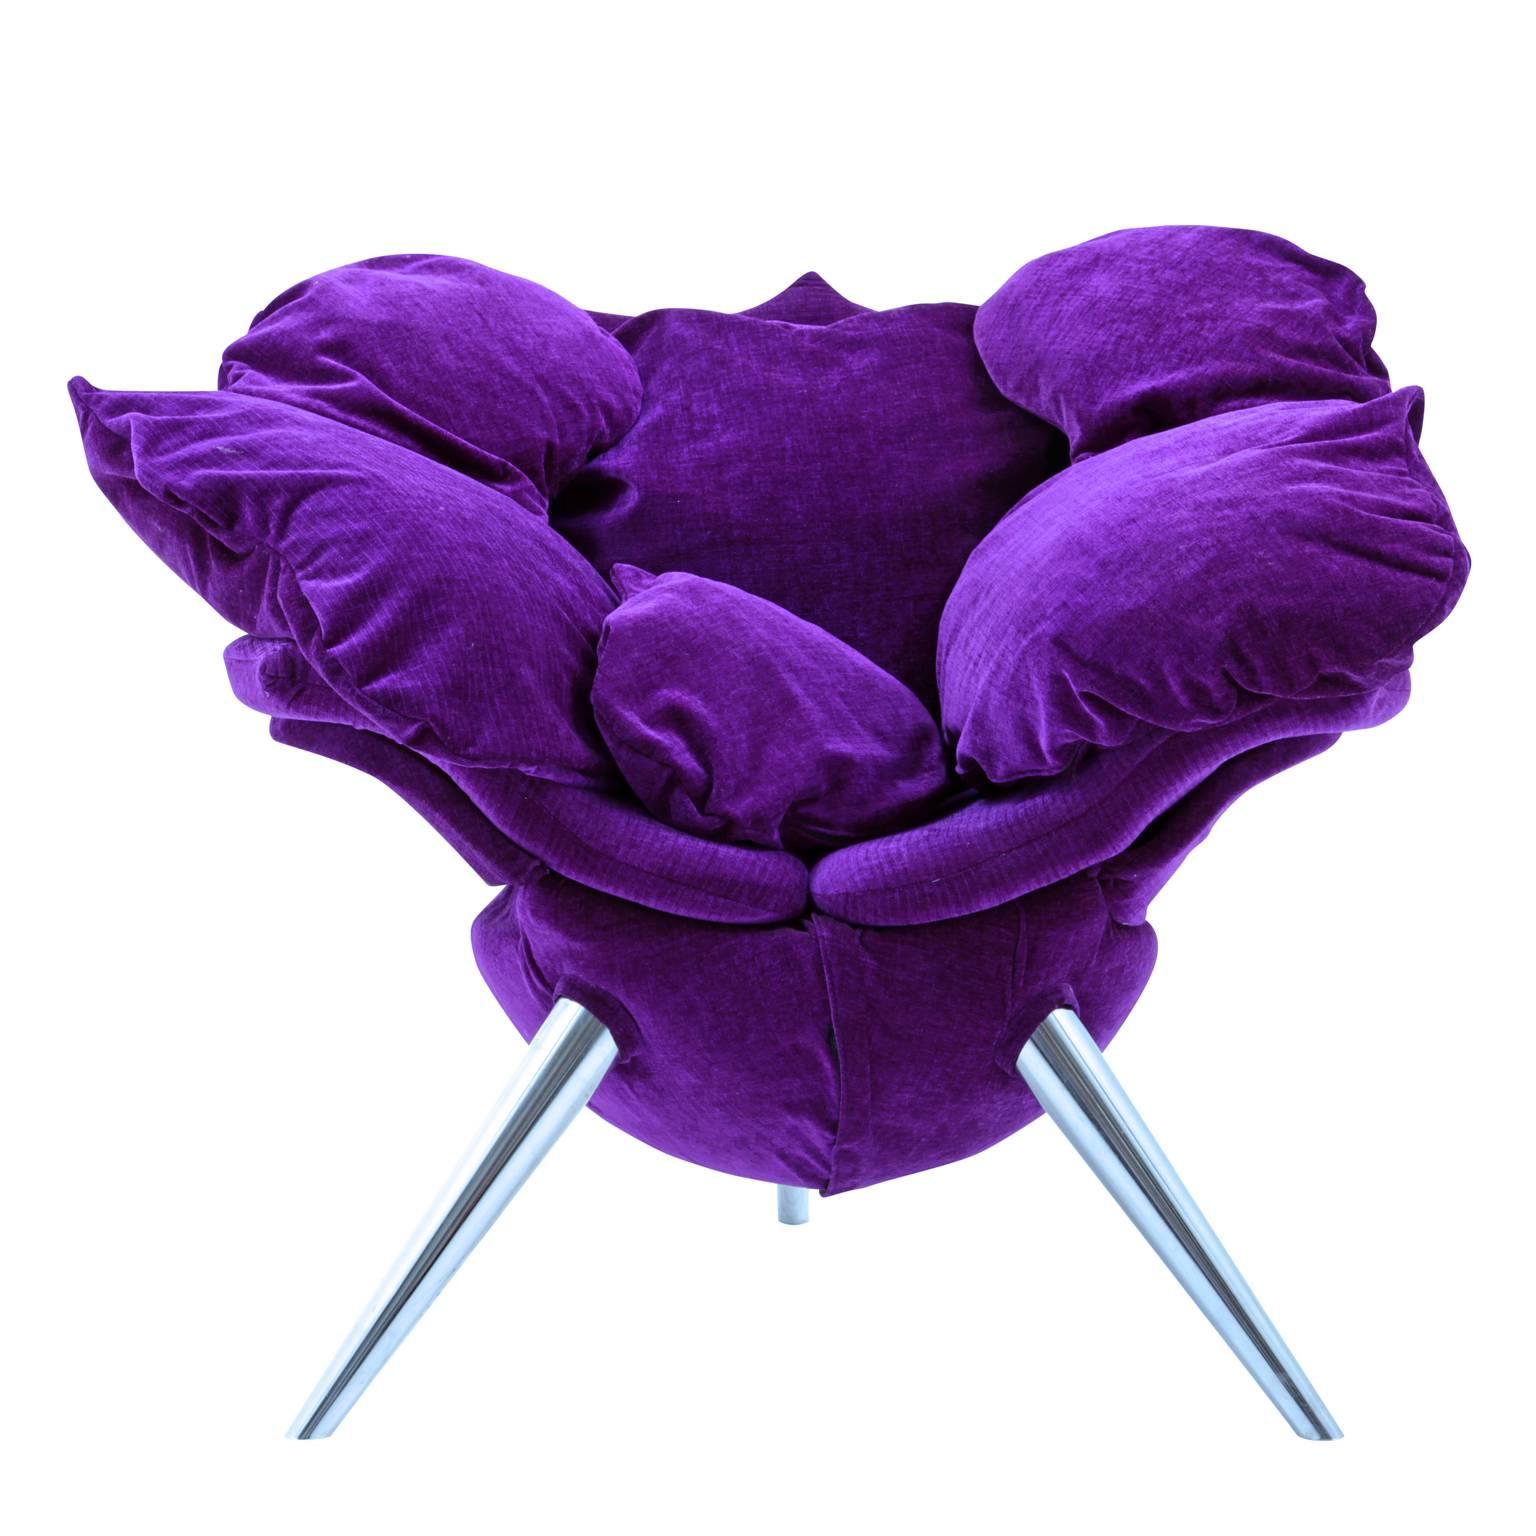 The chair stands on three conical tapered aluminium legs covered in a purple-colored suede fabric. The seat is decorated with voluminous rose pedal-shaped cushions, so the whole chair looks like a rose blossom. 
The Japanese designer Masanori Umeda